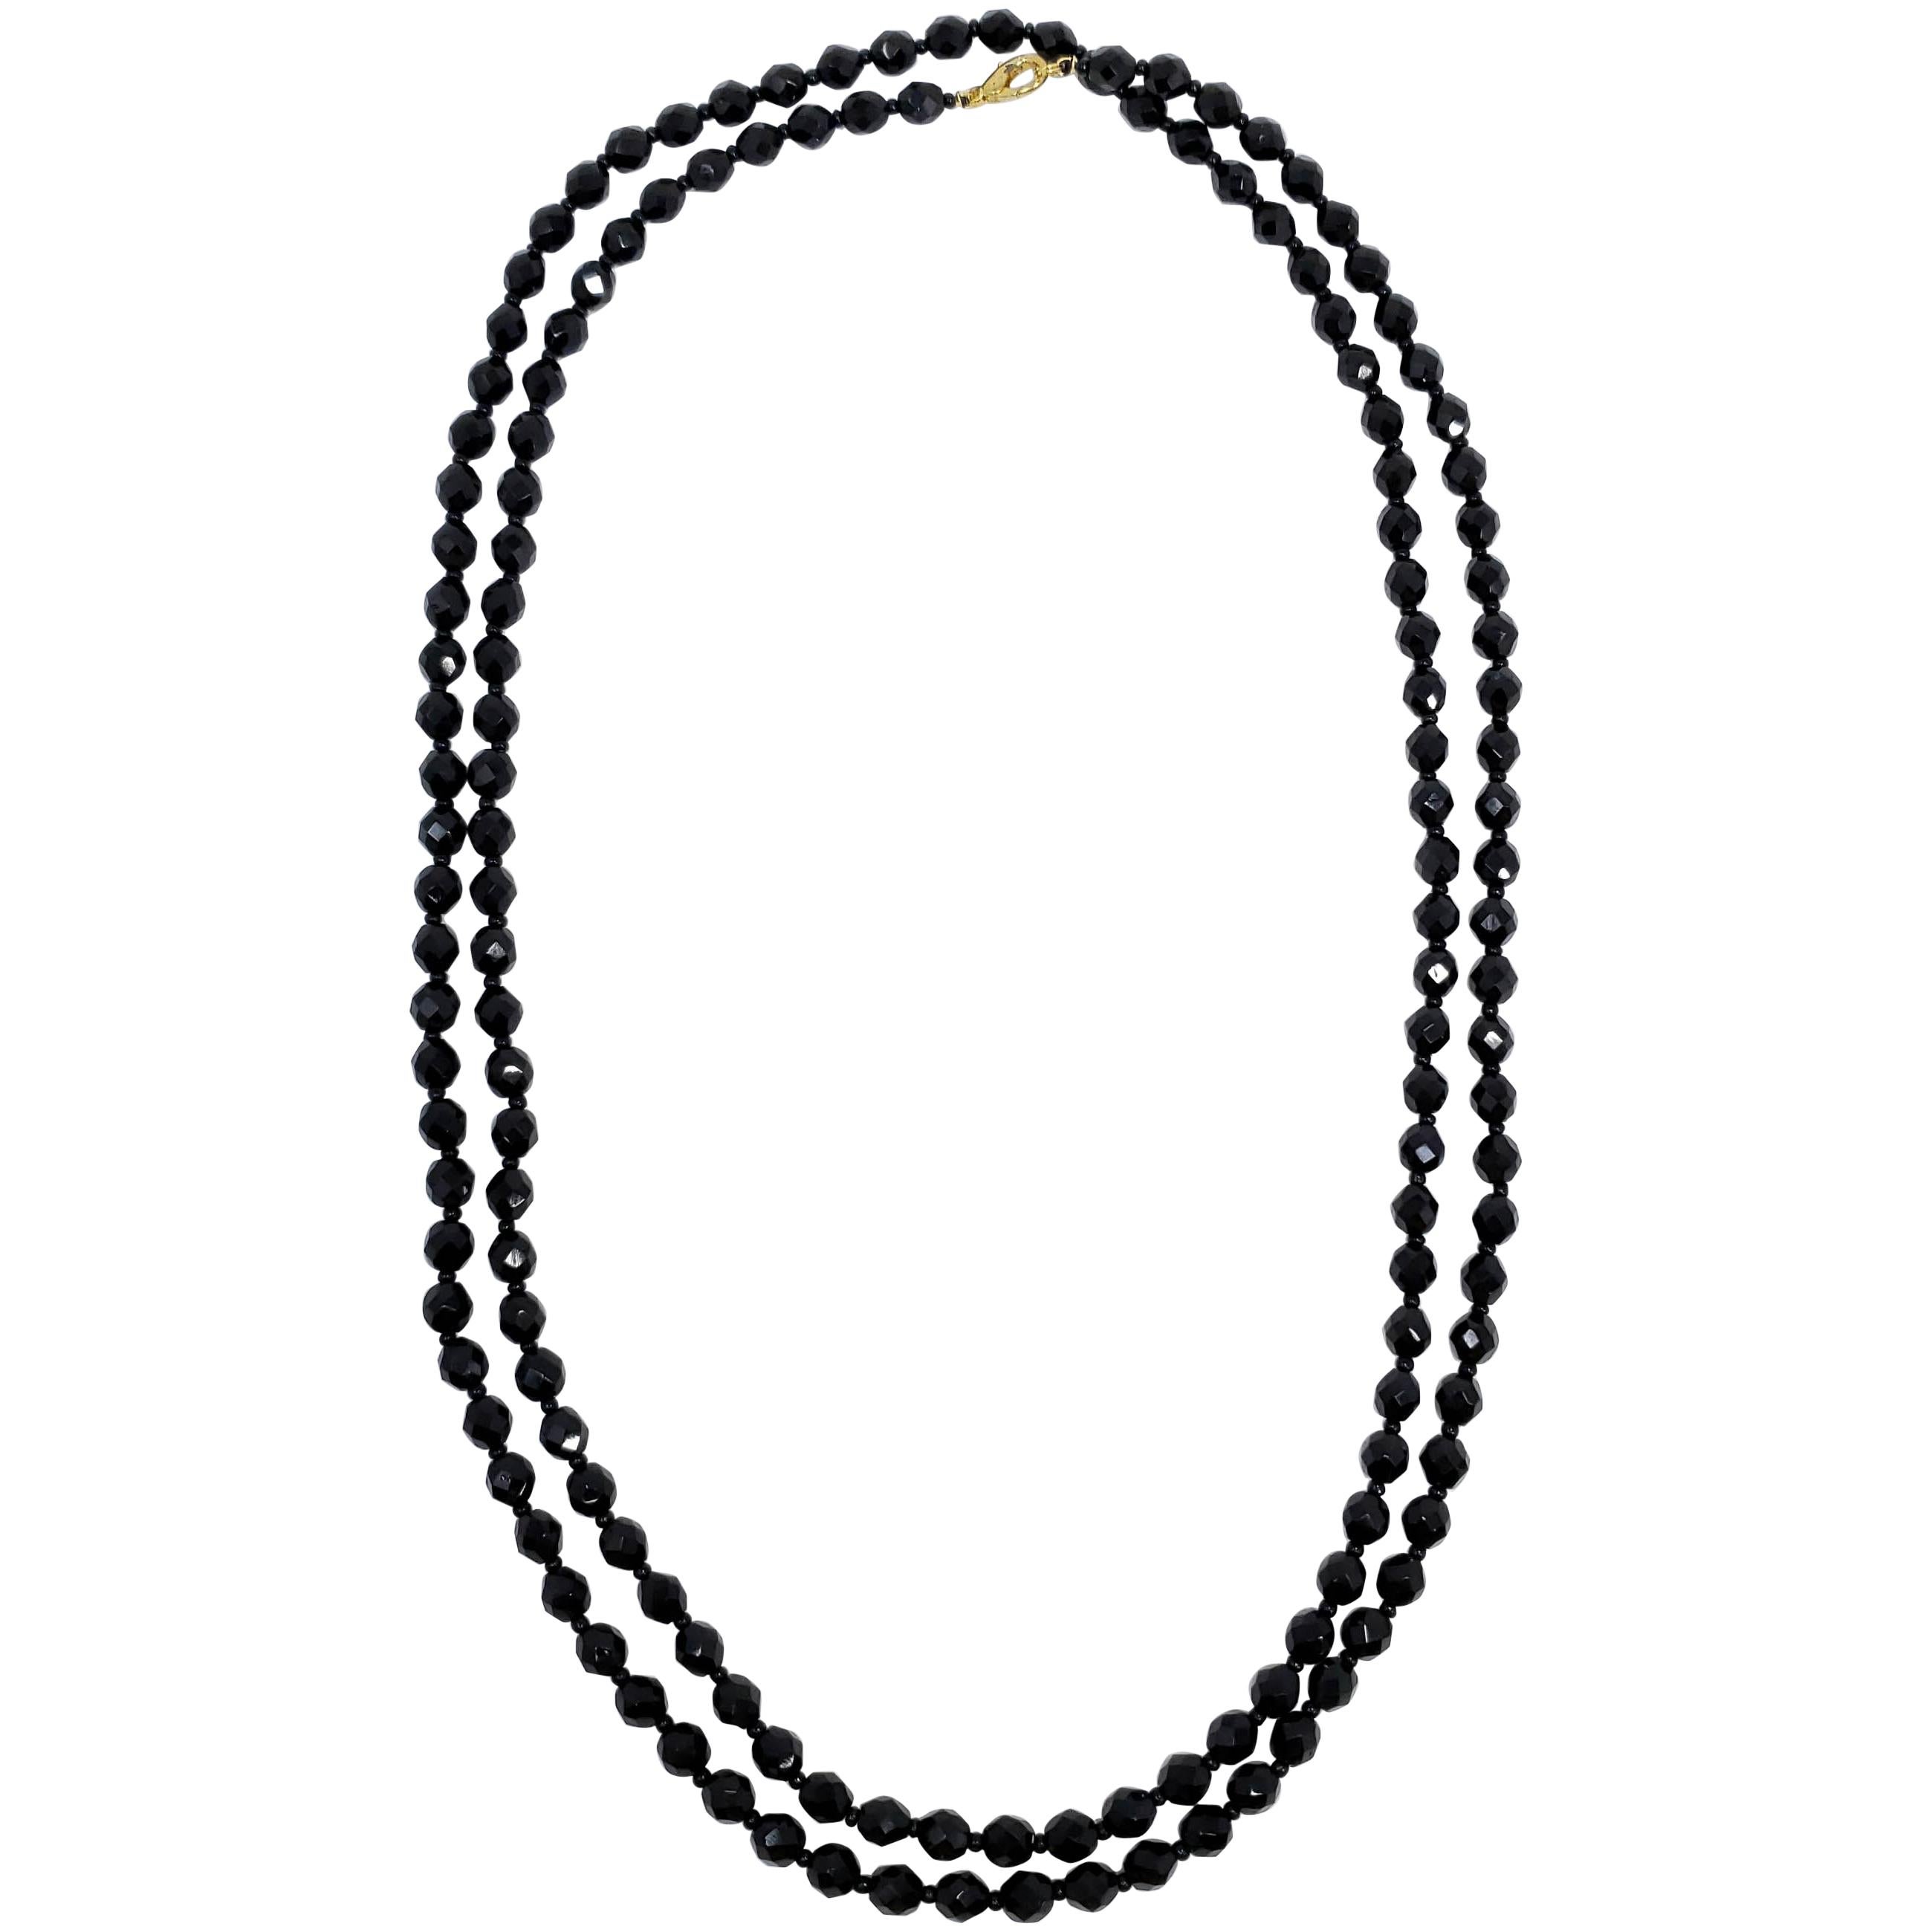 70" Black Czechoslovakian Jet Faceted Crystal Bead Long Rope Necklace, Mid 1900s